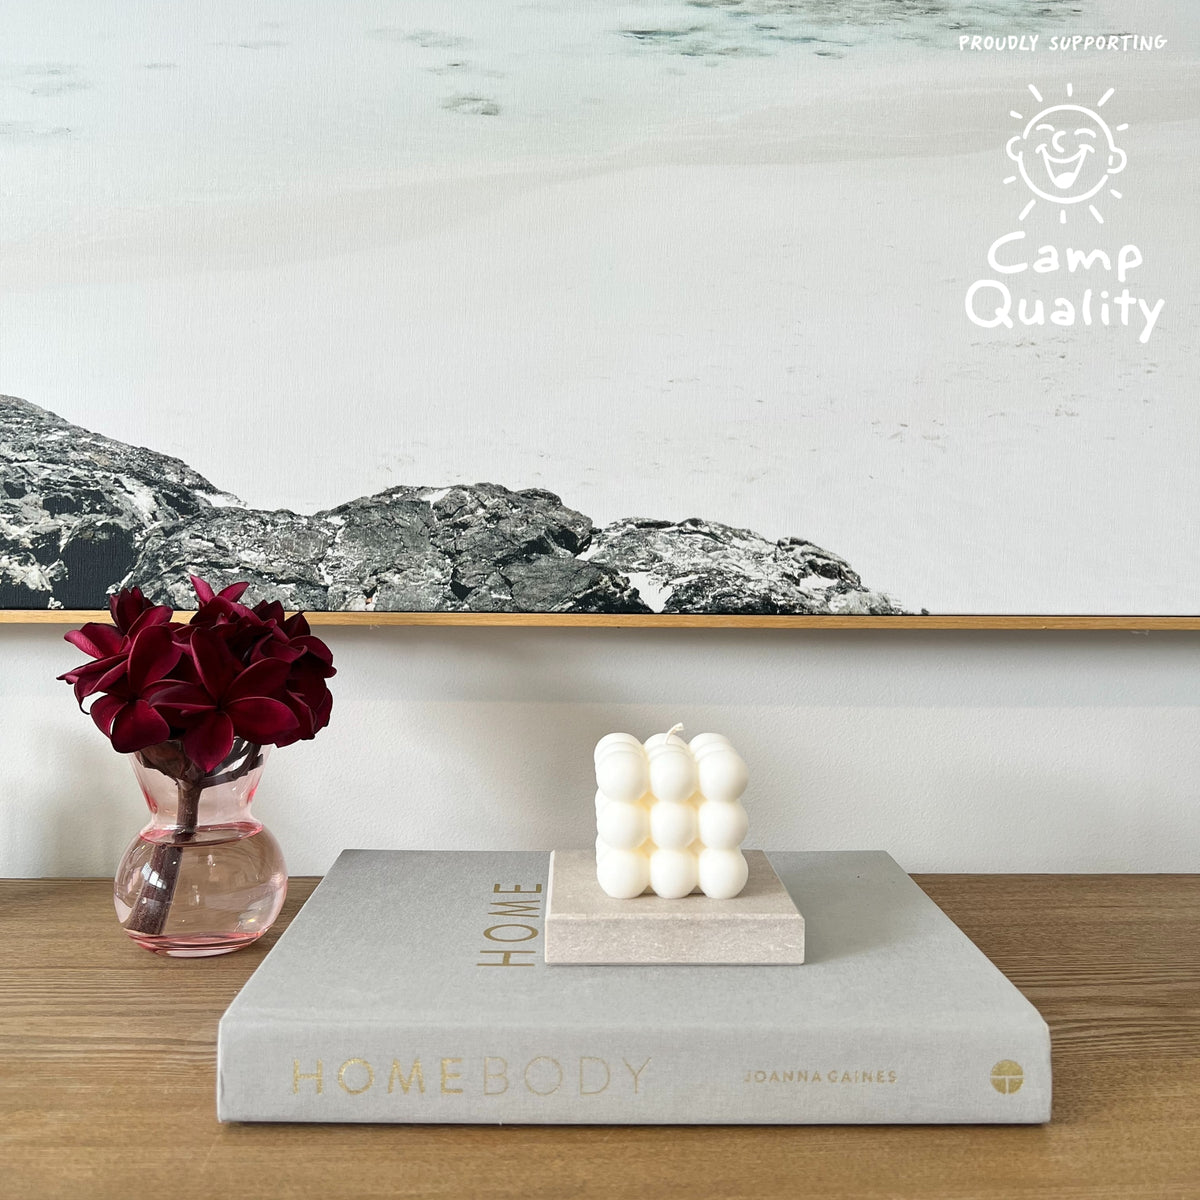 Quartz Square Candle Holder in Caesarstone Topus Concrete created by Aureliia Collection. Styled with Studio McKenna No. 27 candle, upon Joanna Gaines book  next to vase with fresh flowers on timber table. This candle holder has full of movement, opacity, and depth of delicate mineral formations over a warm greige base, flushed with rugged patinas and pastel-pink undertones. The perfect home decor item.